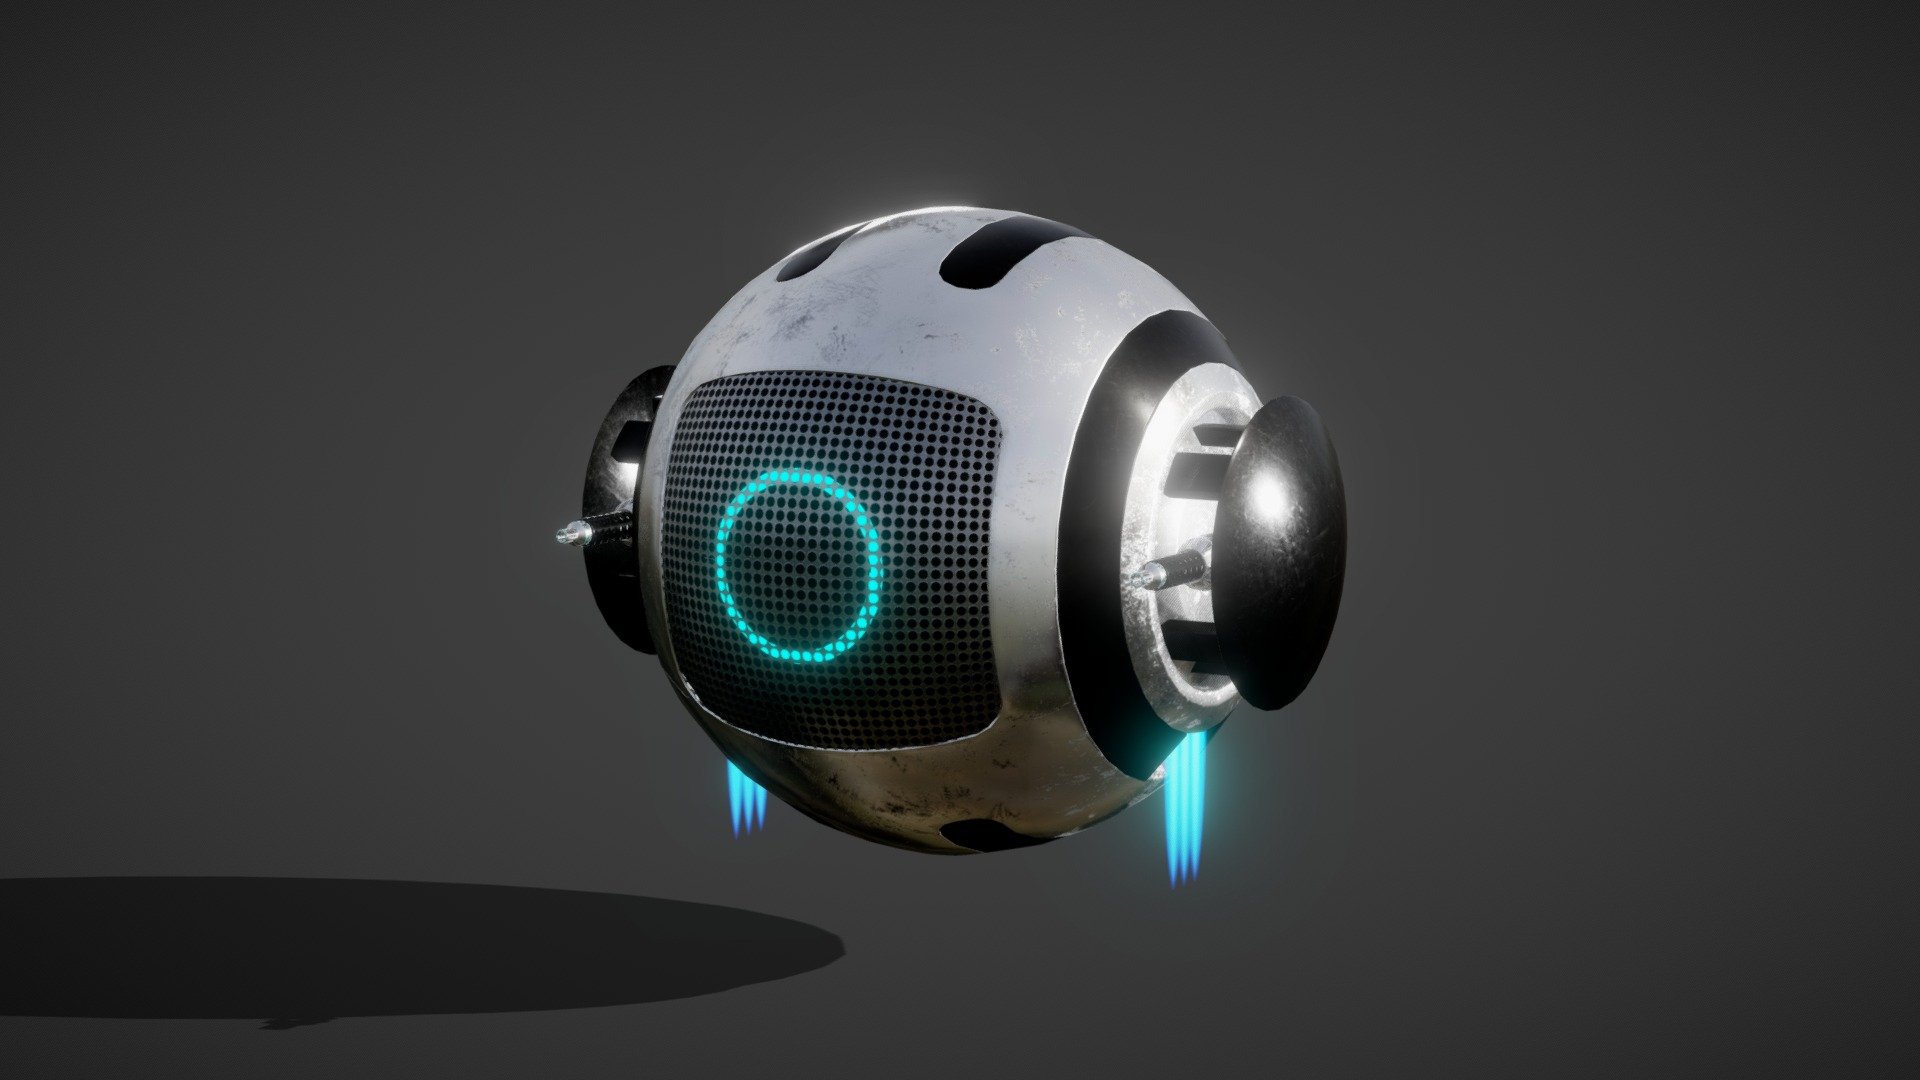 S-Bot Sphere Robot is a machin that can be used in many use cases.
In this verson allows it to pull out 2 machin gun each on 1 side, which can rotate individually, and aim at different targets.
Its face screen can be used to show different expression of robot

Its a Game ready, Low-poly model 3d model